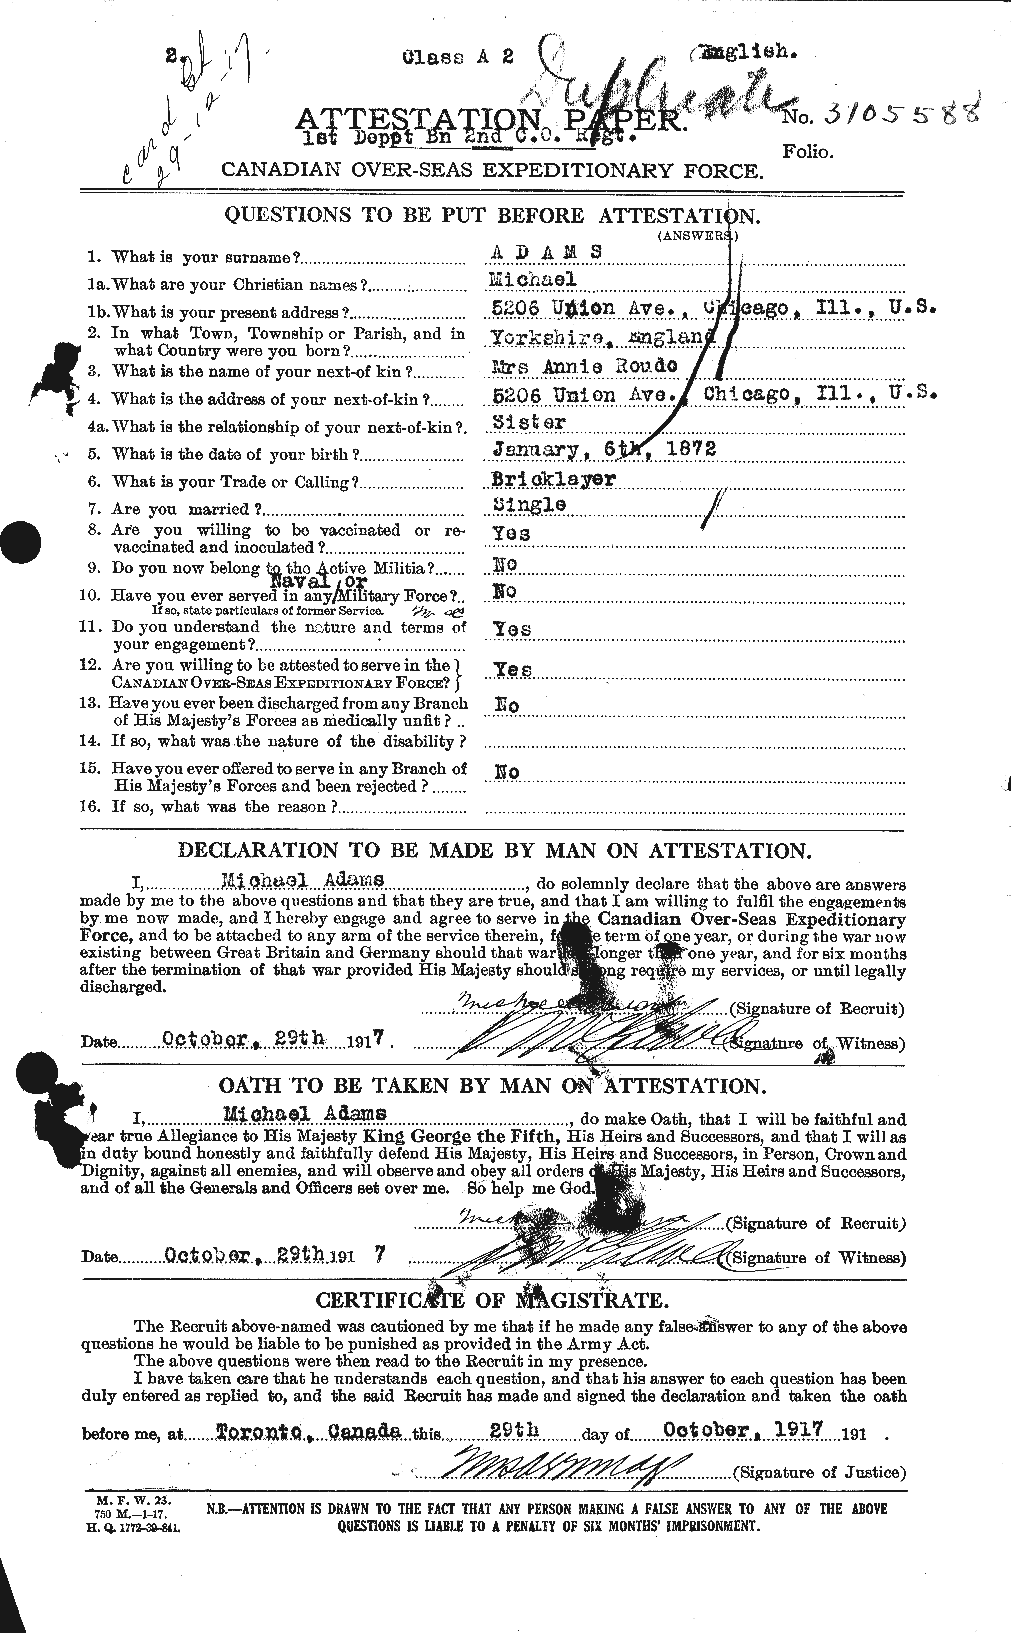 Personnel Records of the First World War - CEF 201980a